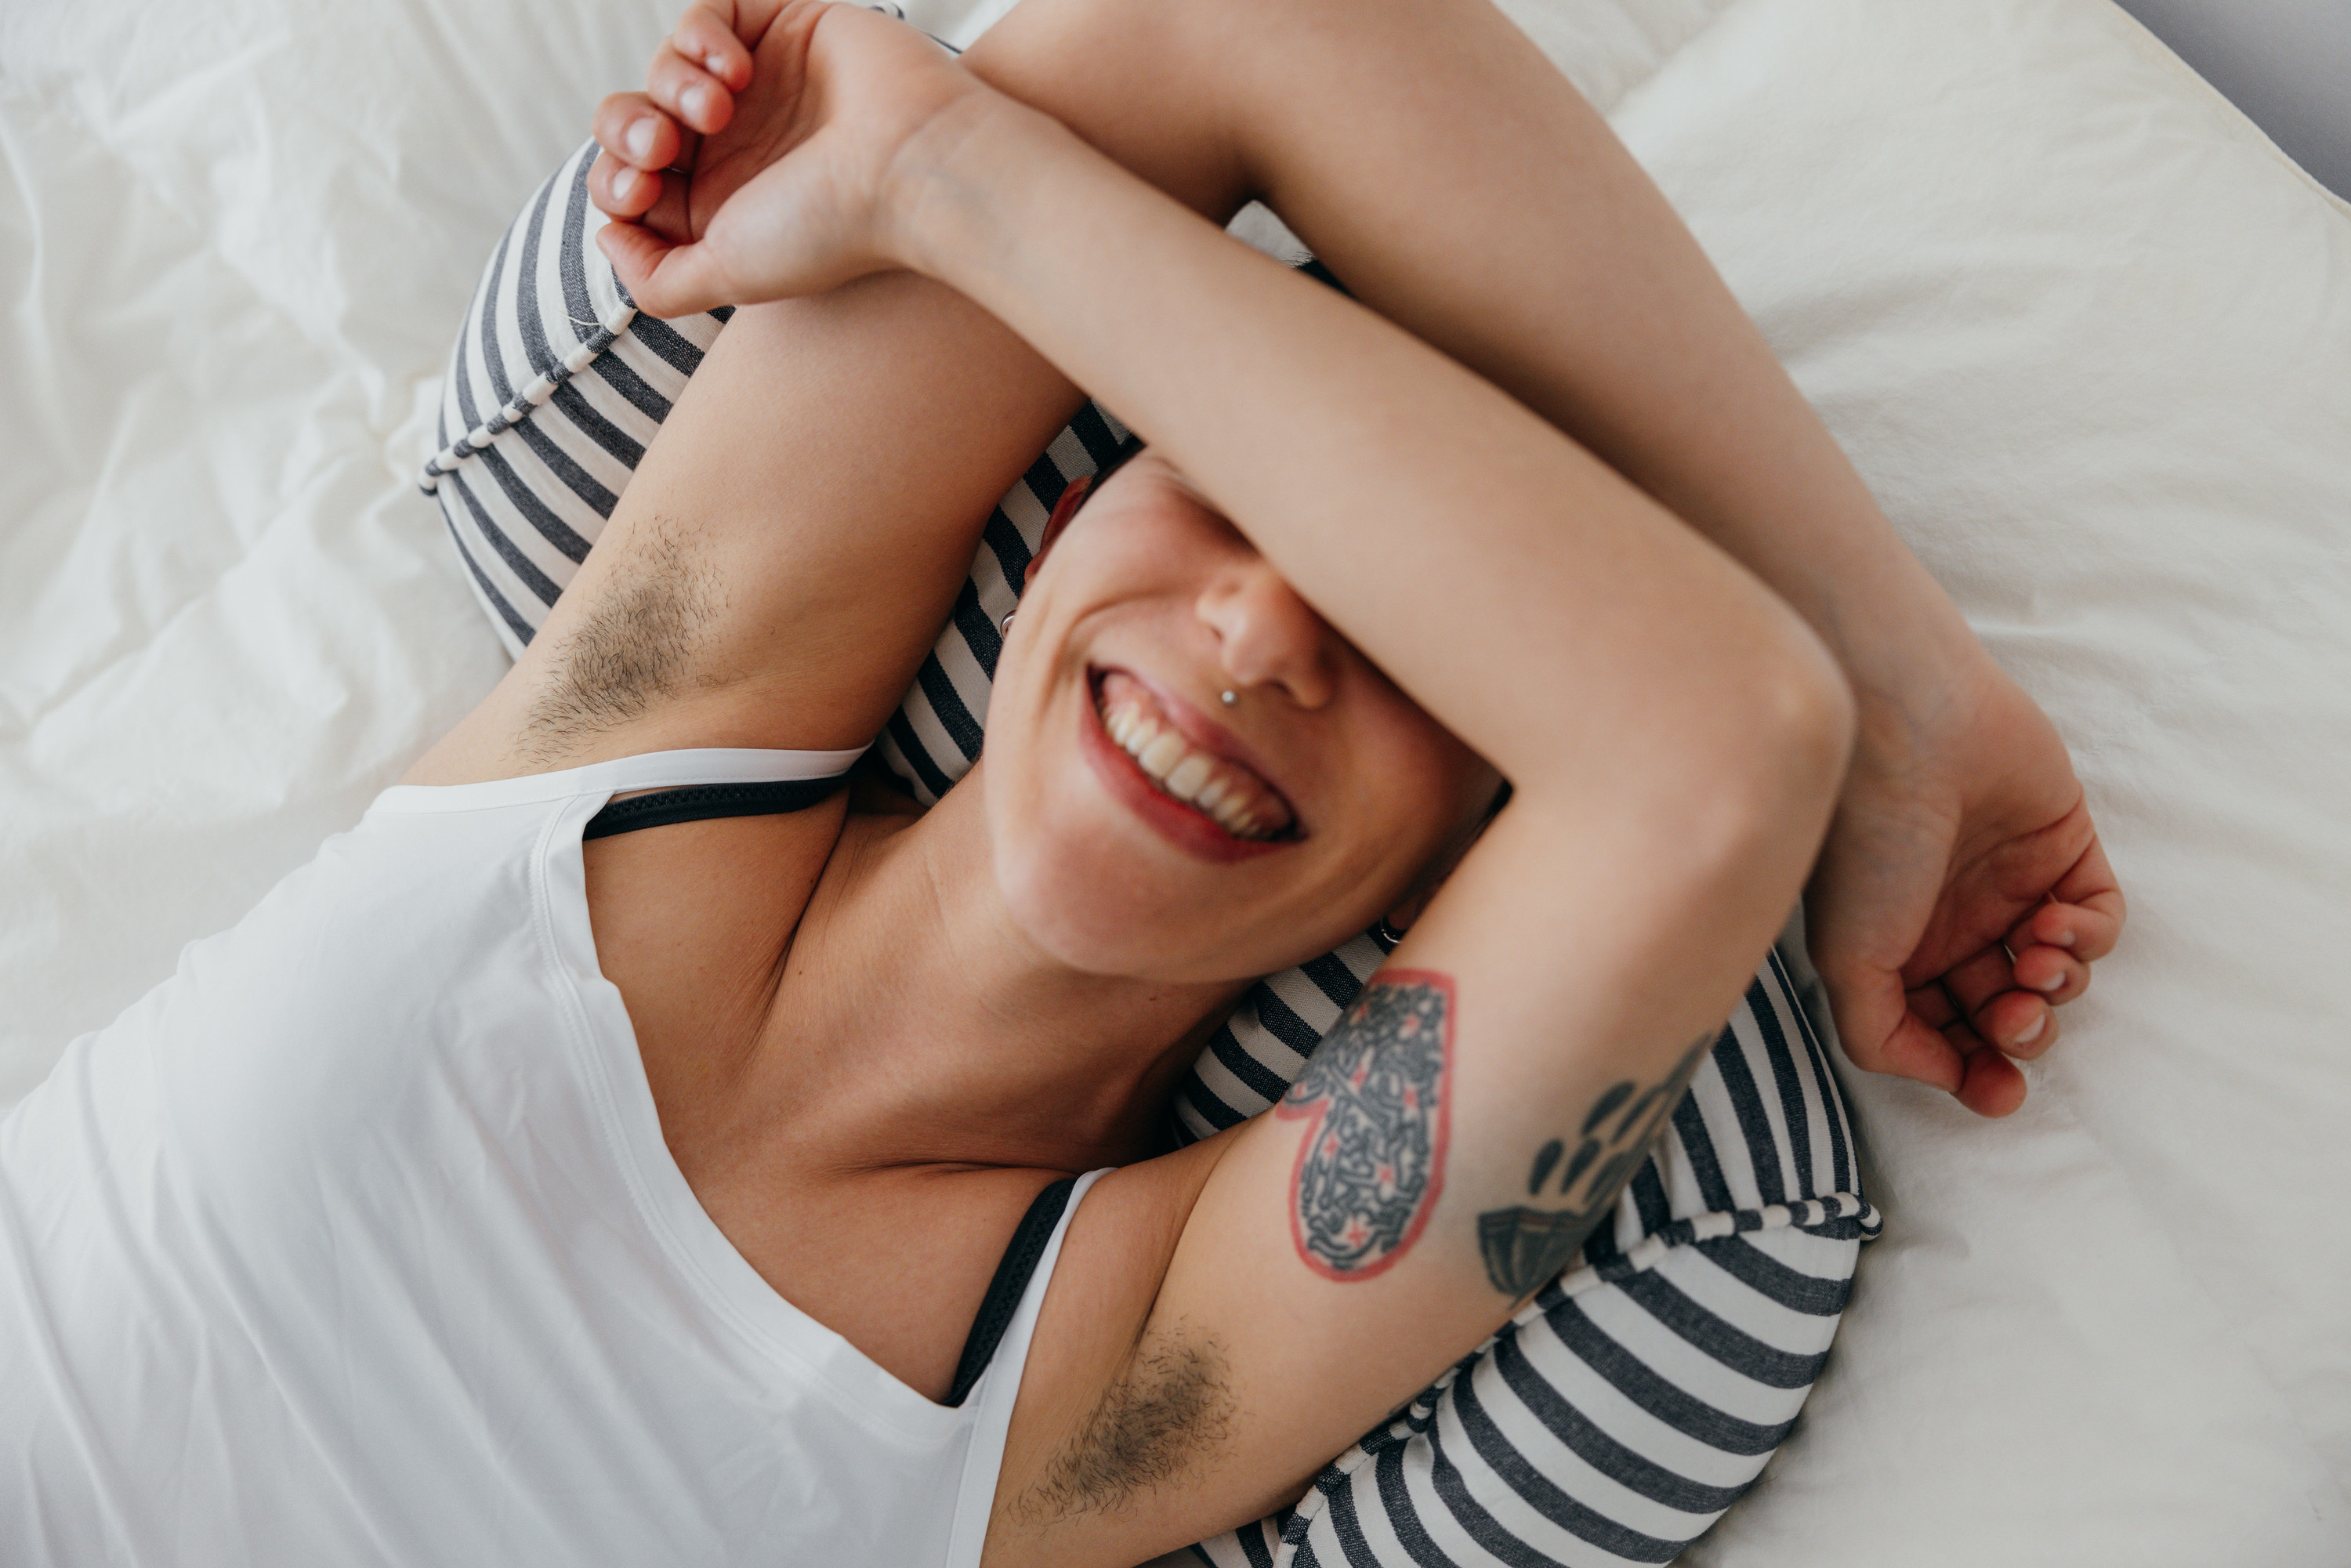 Smiling woman with hairy armpits